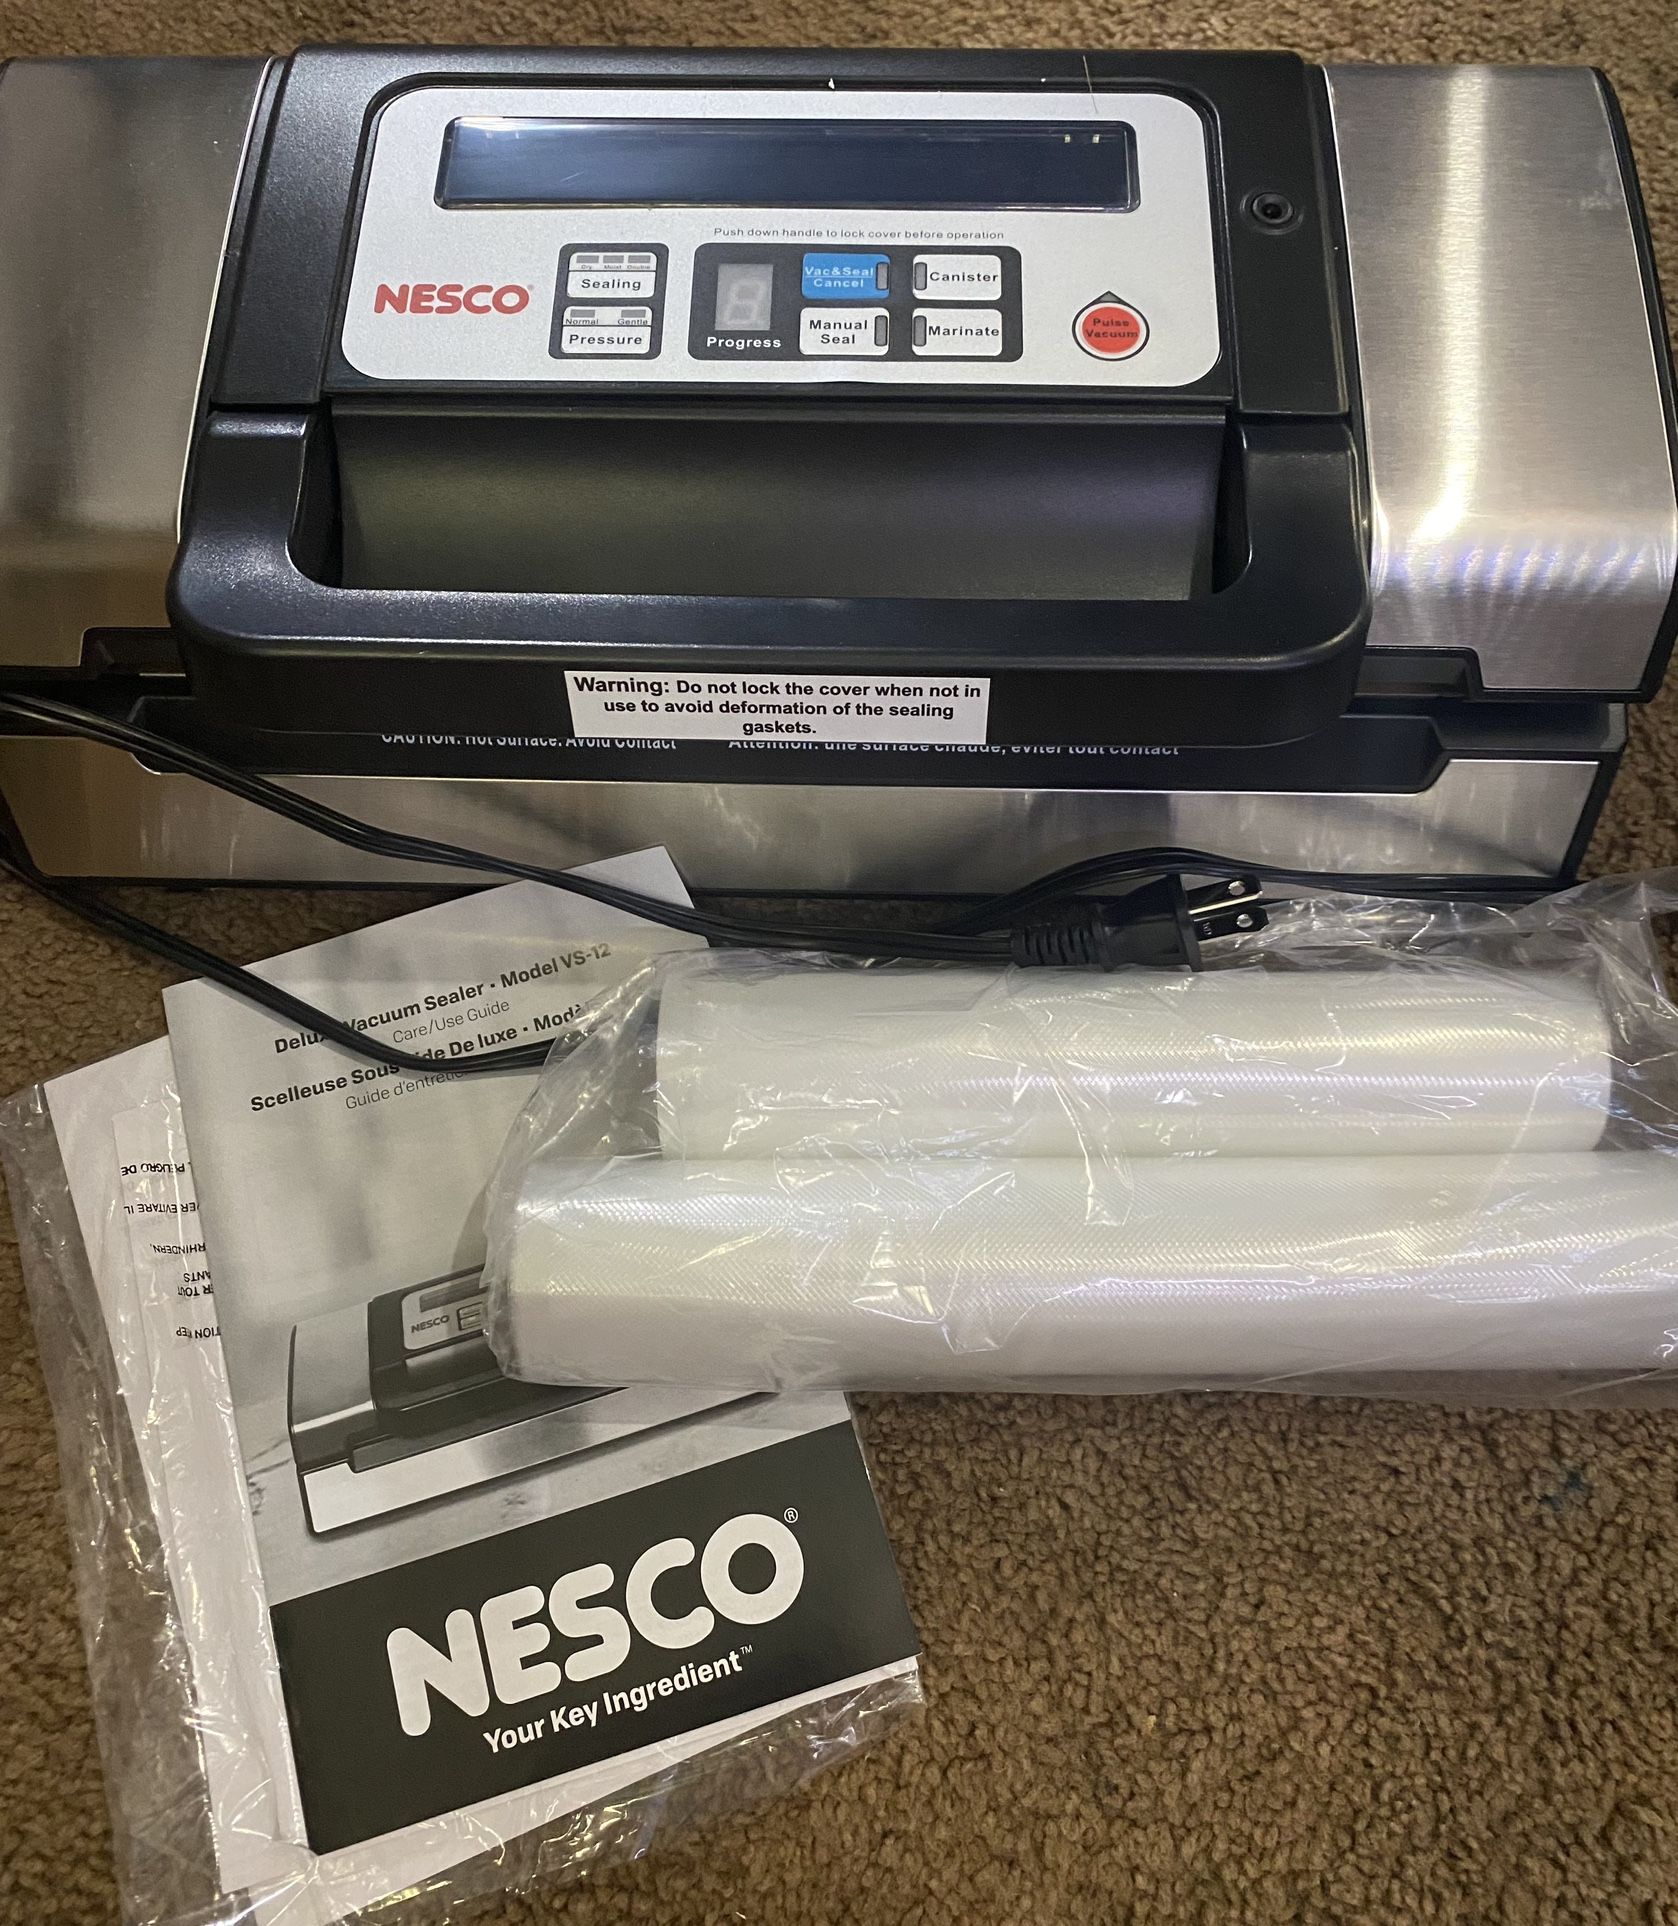 Nesco Vacumn Sealer Brand New for Sale in Fairview Heights, IL